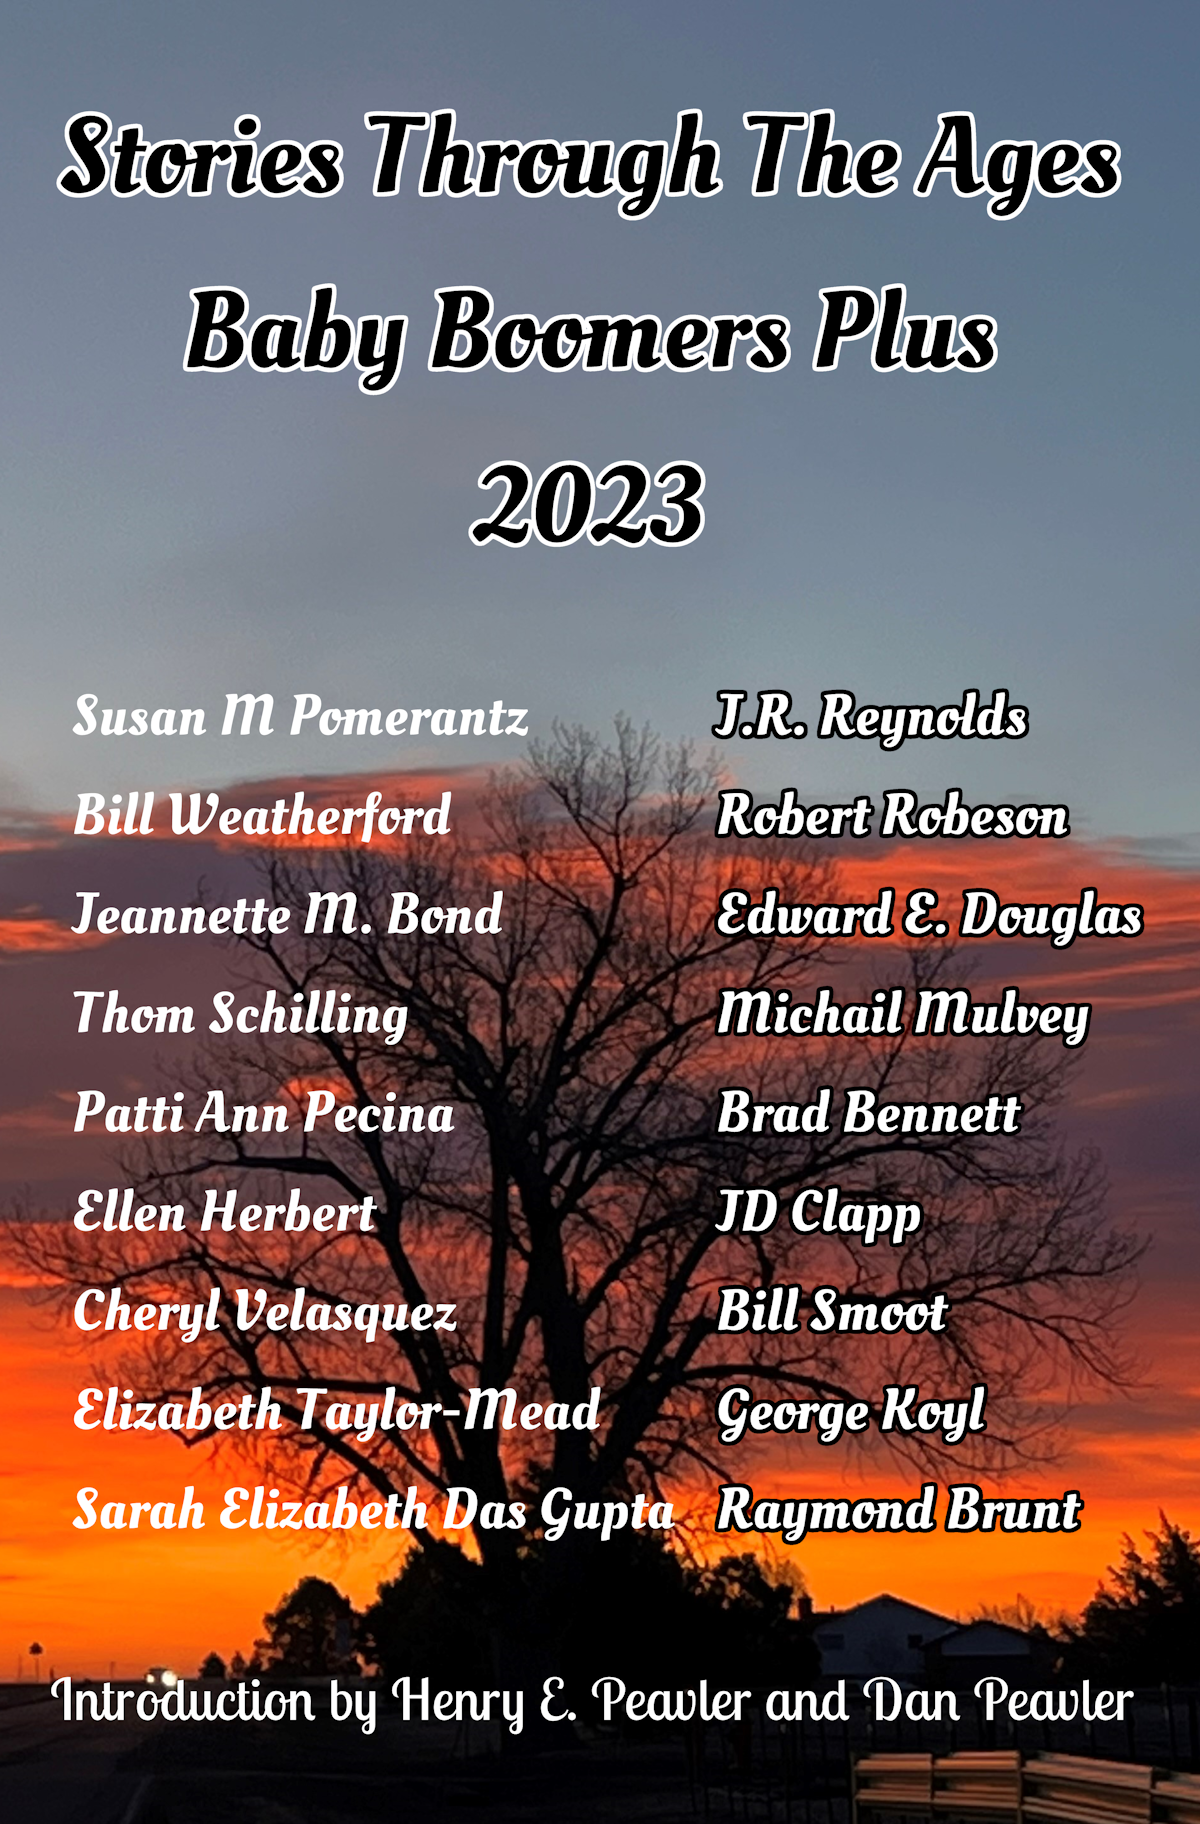 Baby Boomers Plus 2023